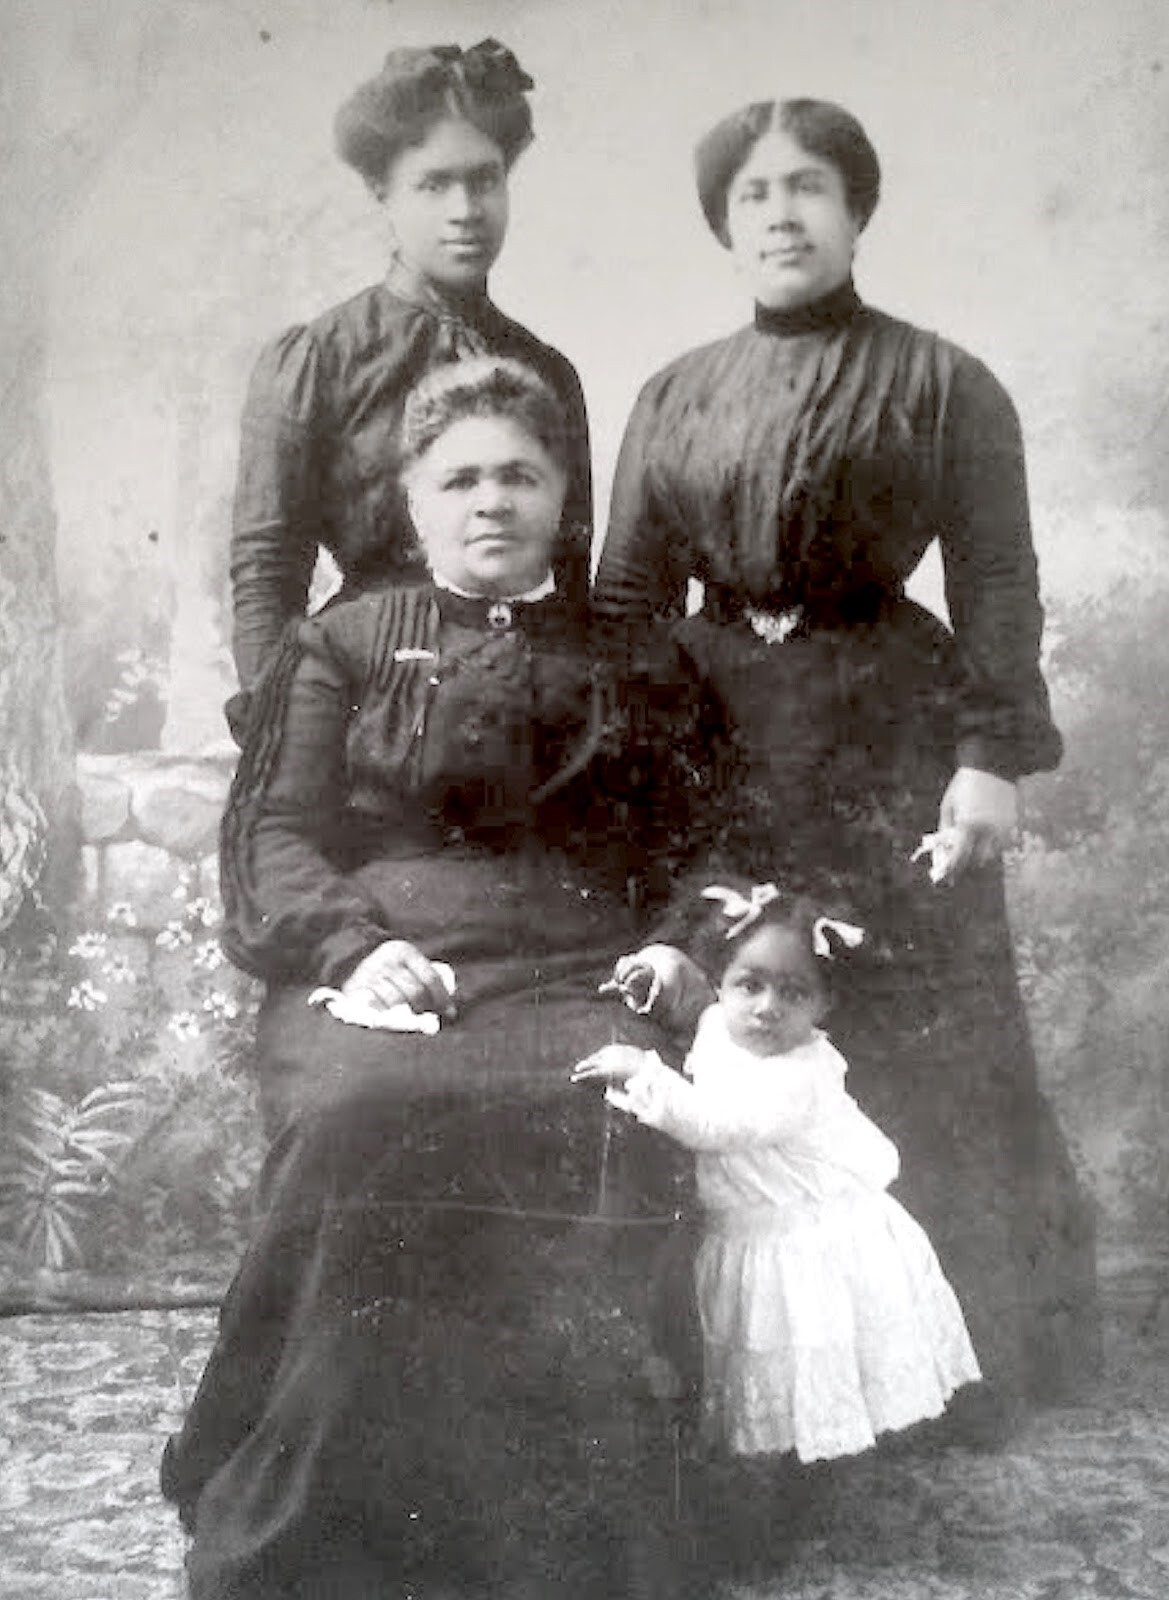 Four women in period dress, one sitting and two standing pose for a photograph with a little girl in a white dress stands, holding onto the leg of the sitting woman.